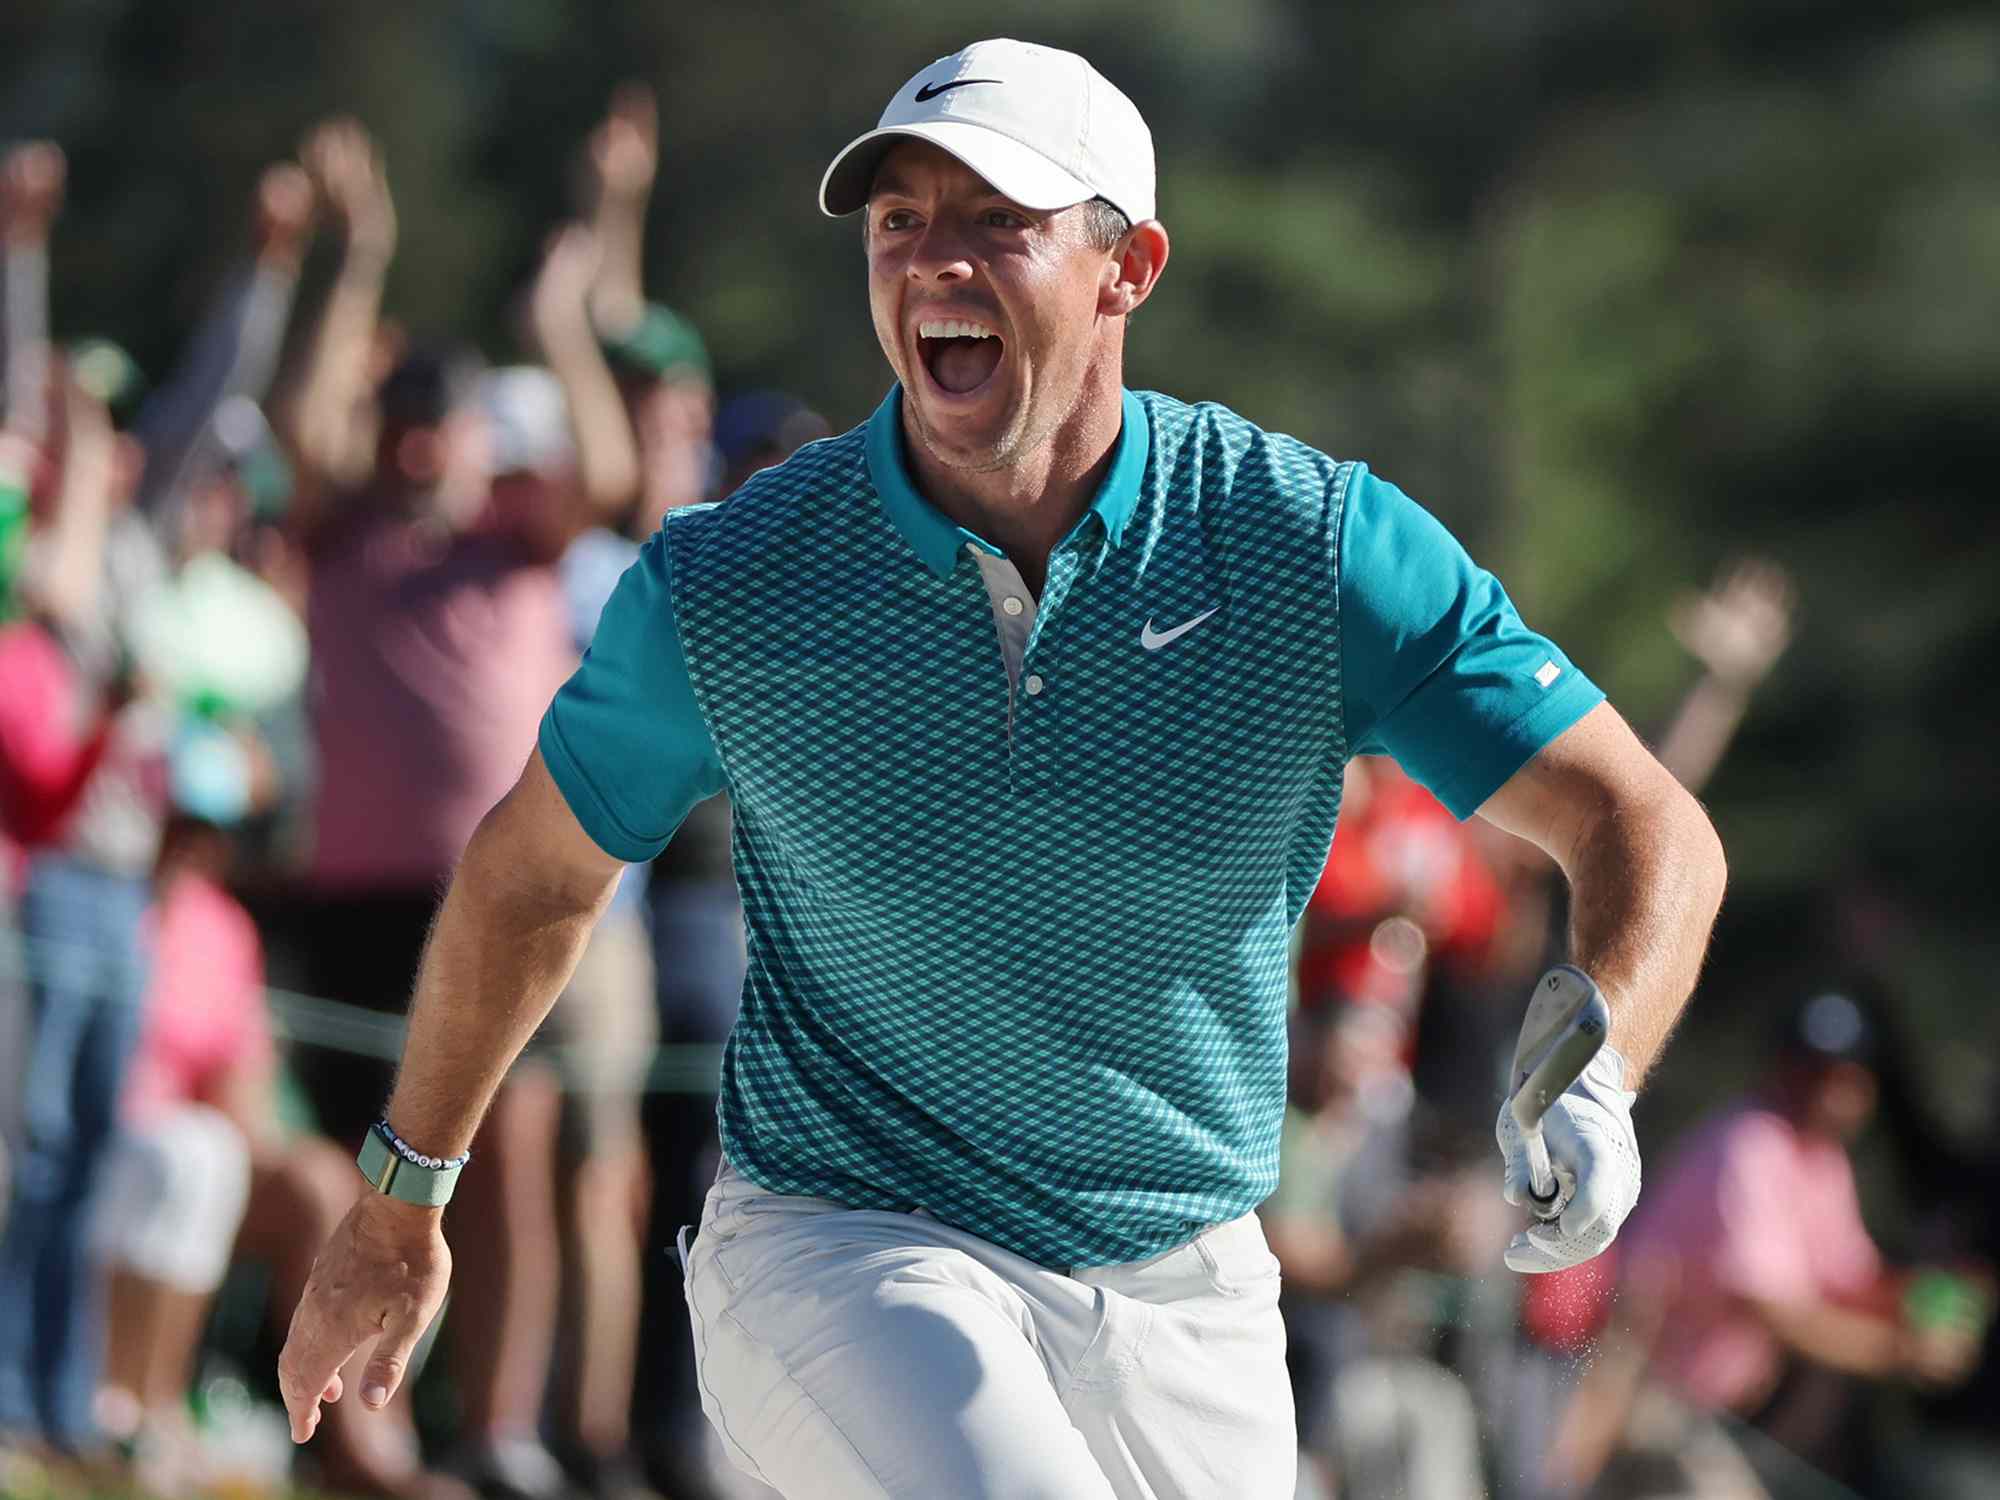 Rory McIlroy of Northern Ireland reacts after chipping in for birdie from the bunker on the 18th green during the final round of the Masters at Augusta National Golf Club on April 10, 2022